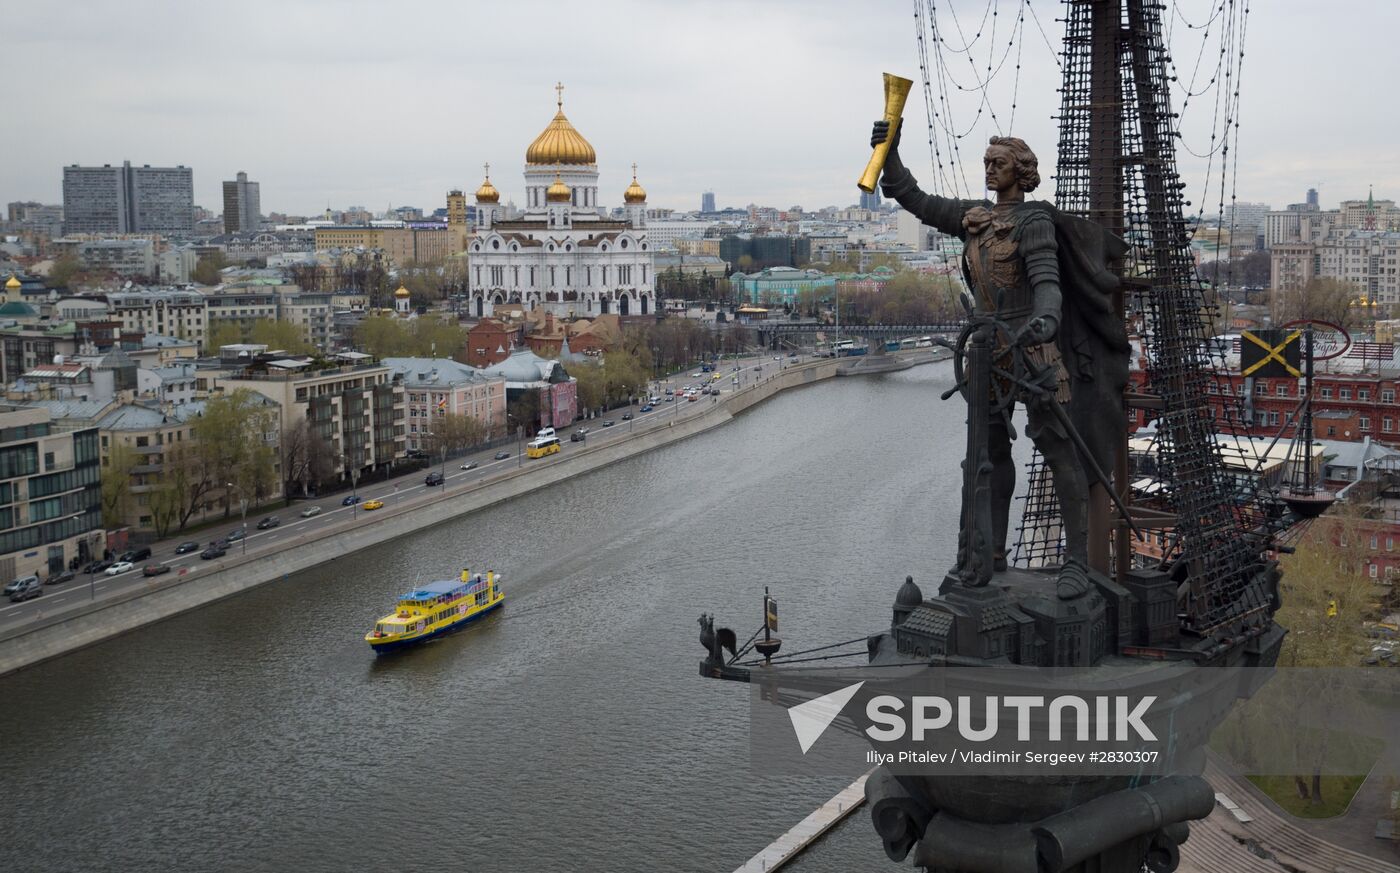 Passenger navigation launched across the Moskva River